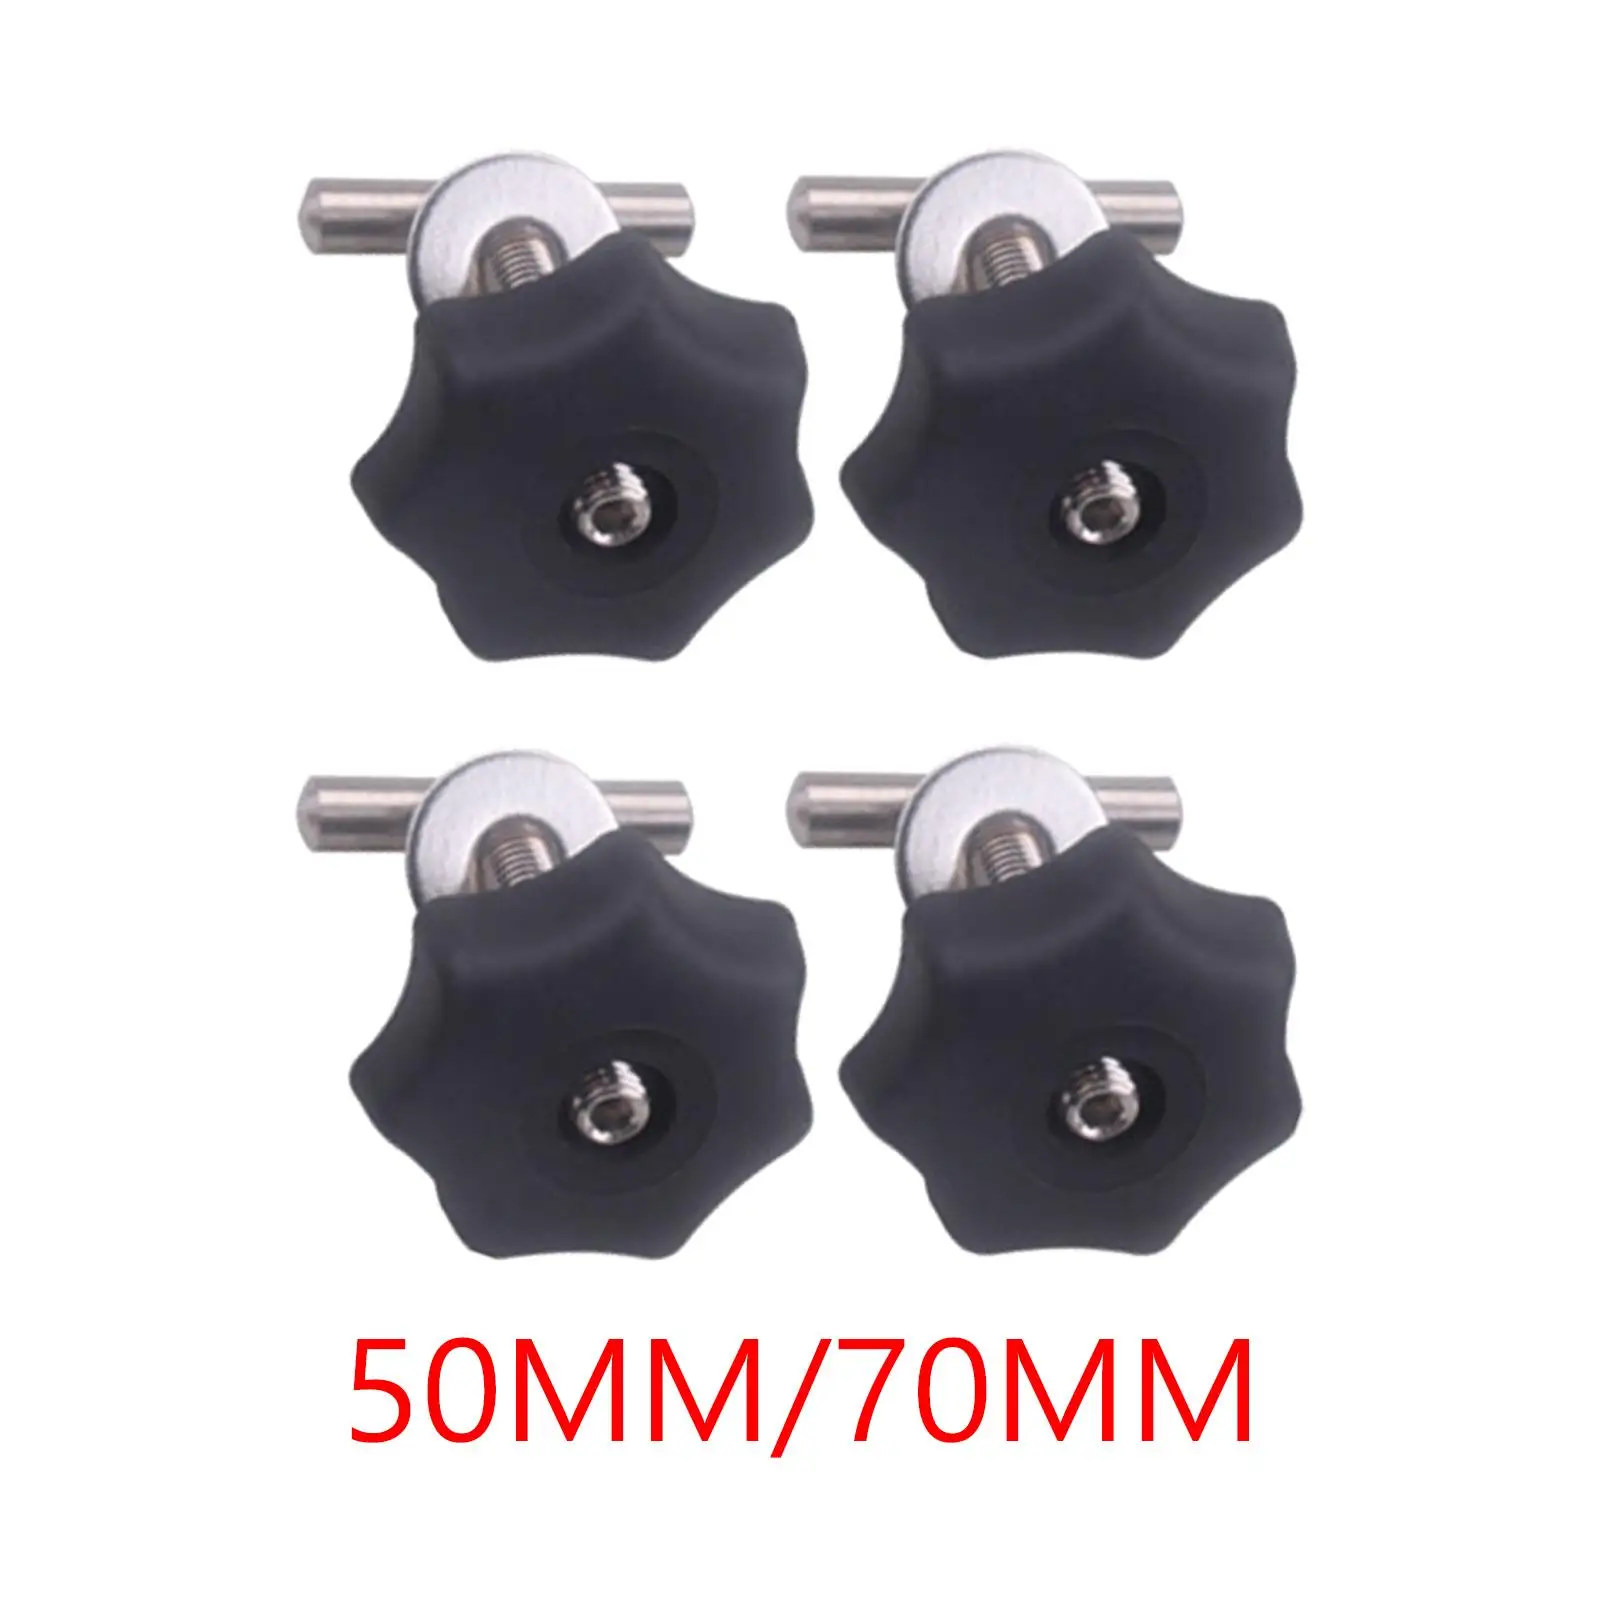 4 Pieces Mounting Screws Accessories Standard Stainless Steel Easy to Intall